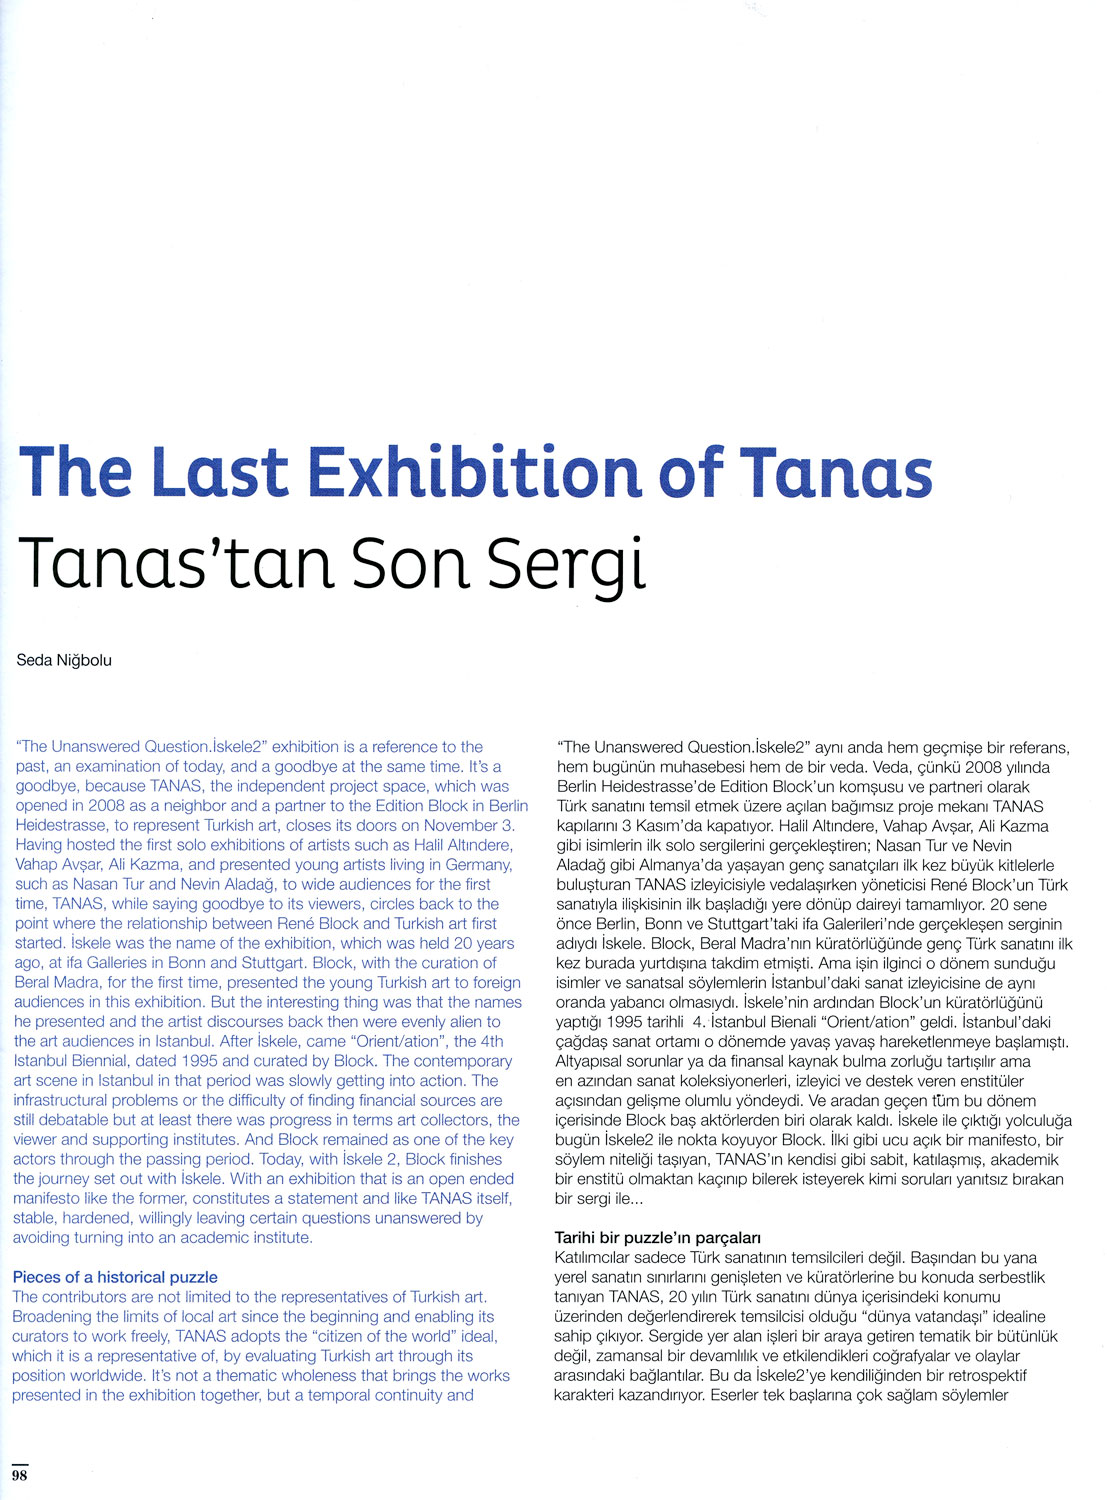 The Last Exhibition of Tanas - Istanbul Contemporary Etc